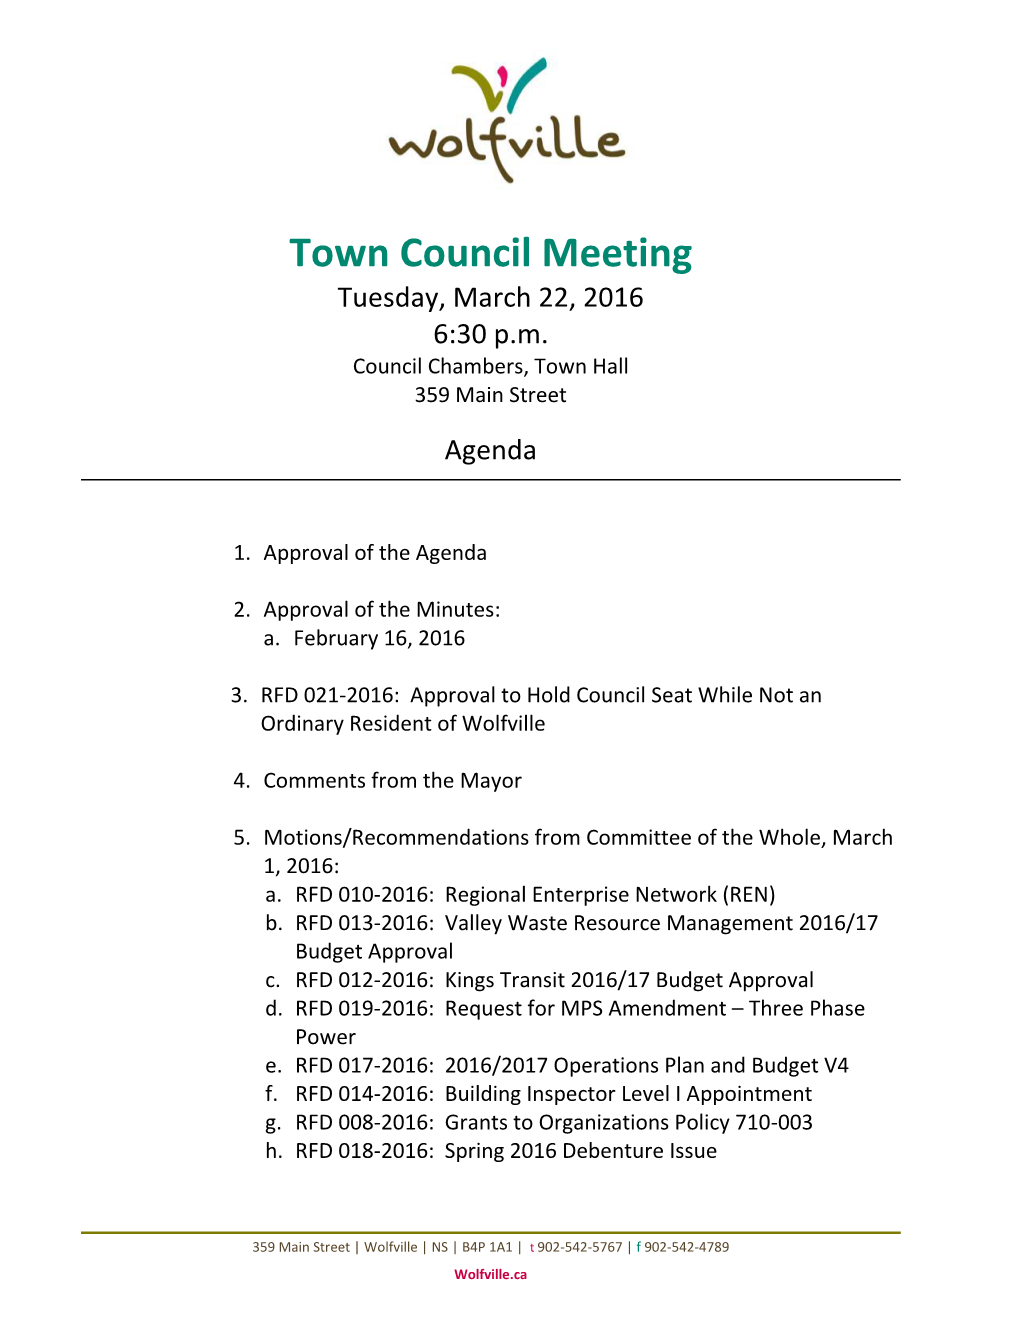 Town Council Meeting Tuesday, March 22, 2016 6:30 P.M